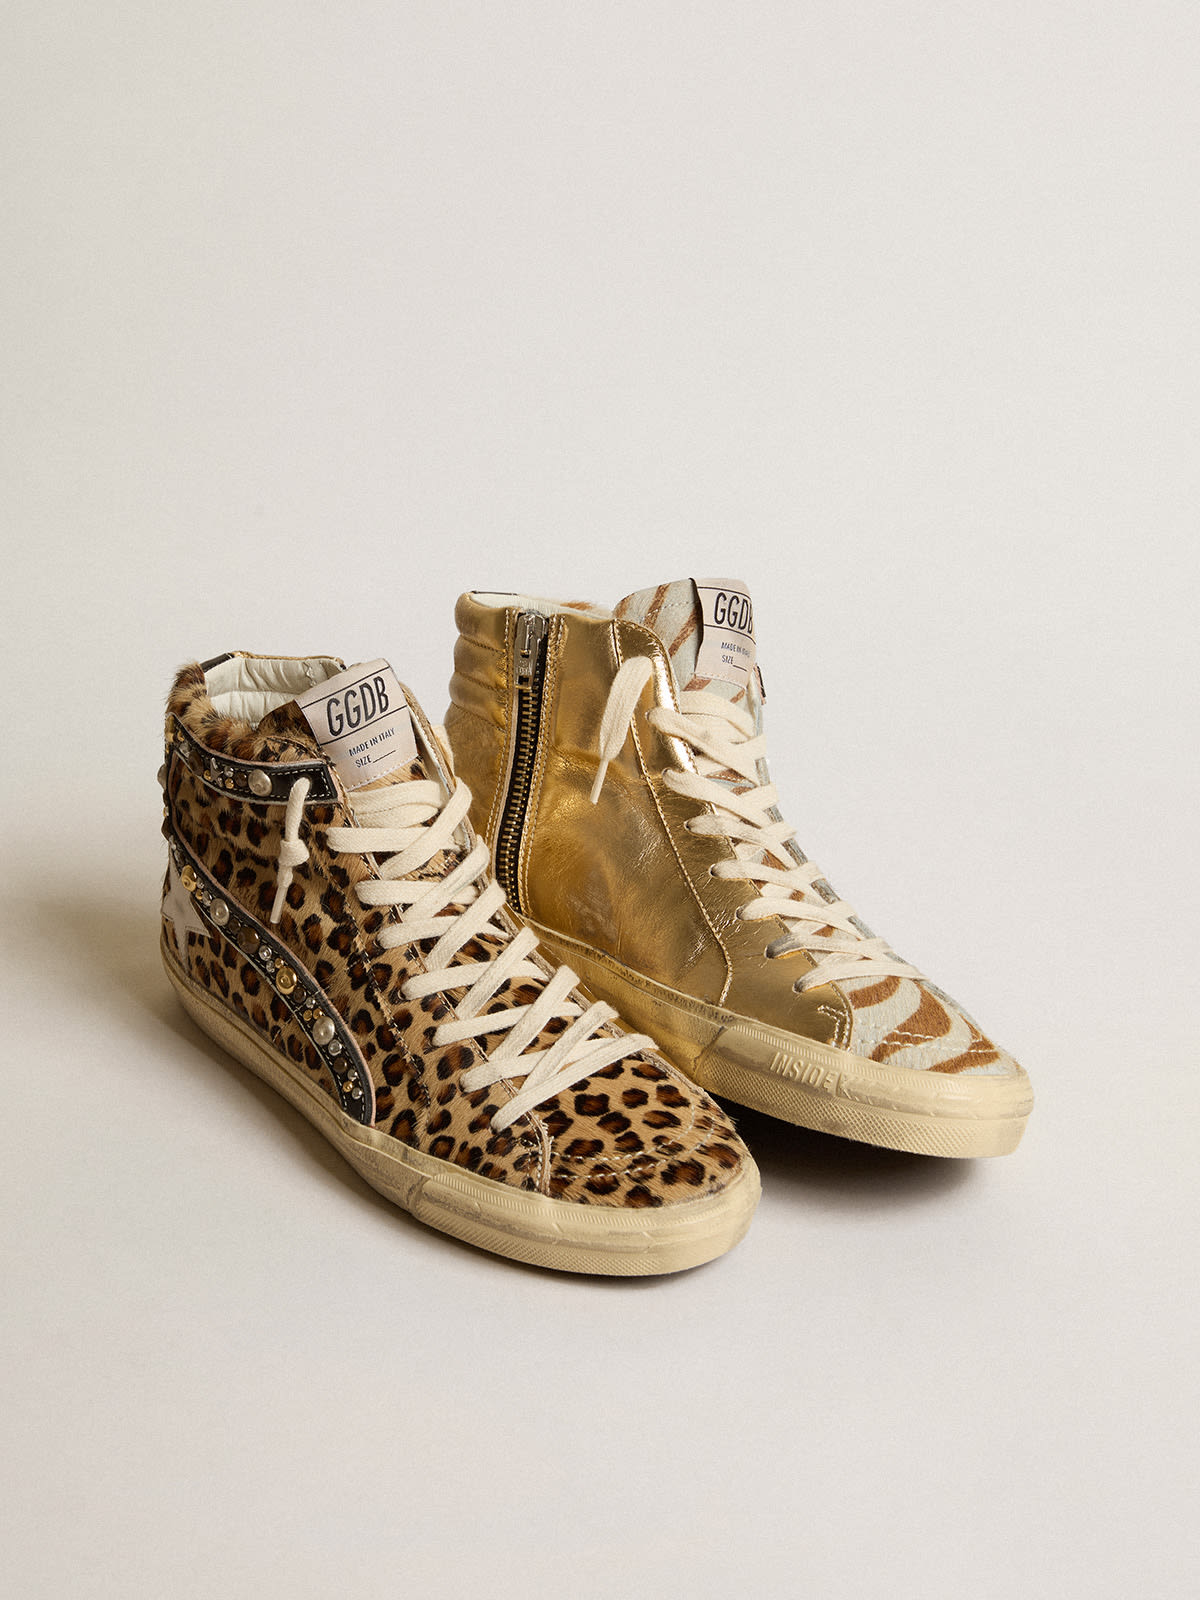 Golden Goose - Women’s Slide LAB in animal-print pony skin with studded leather flash in 